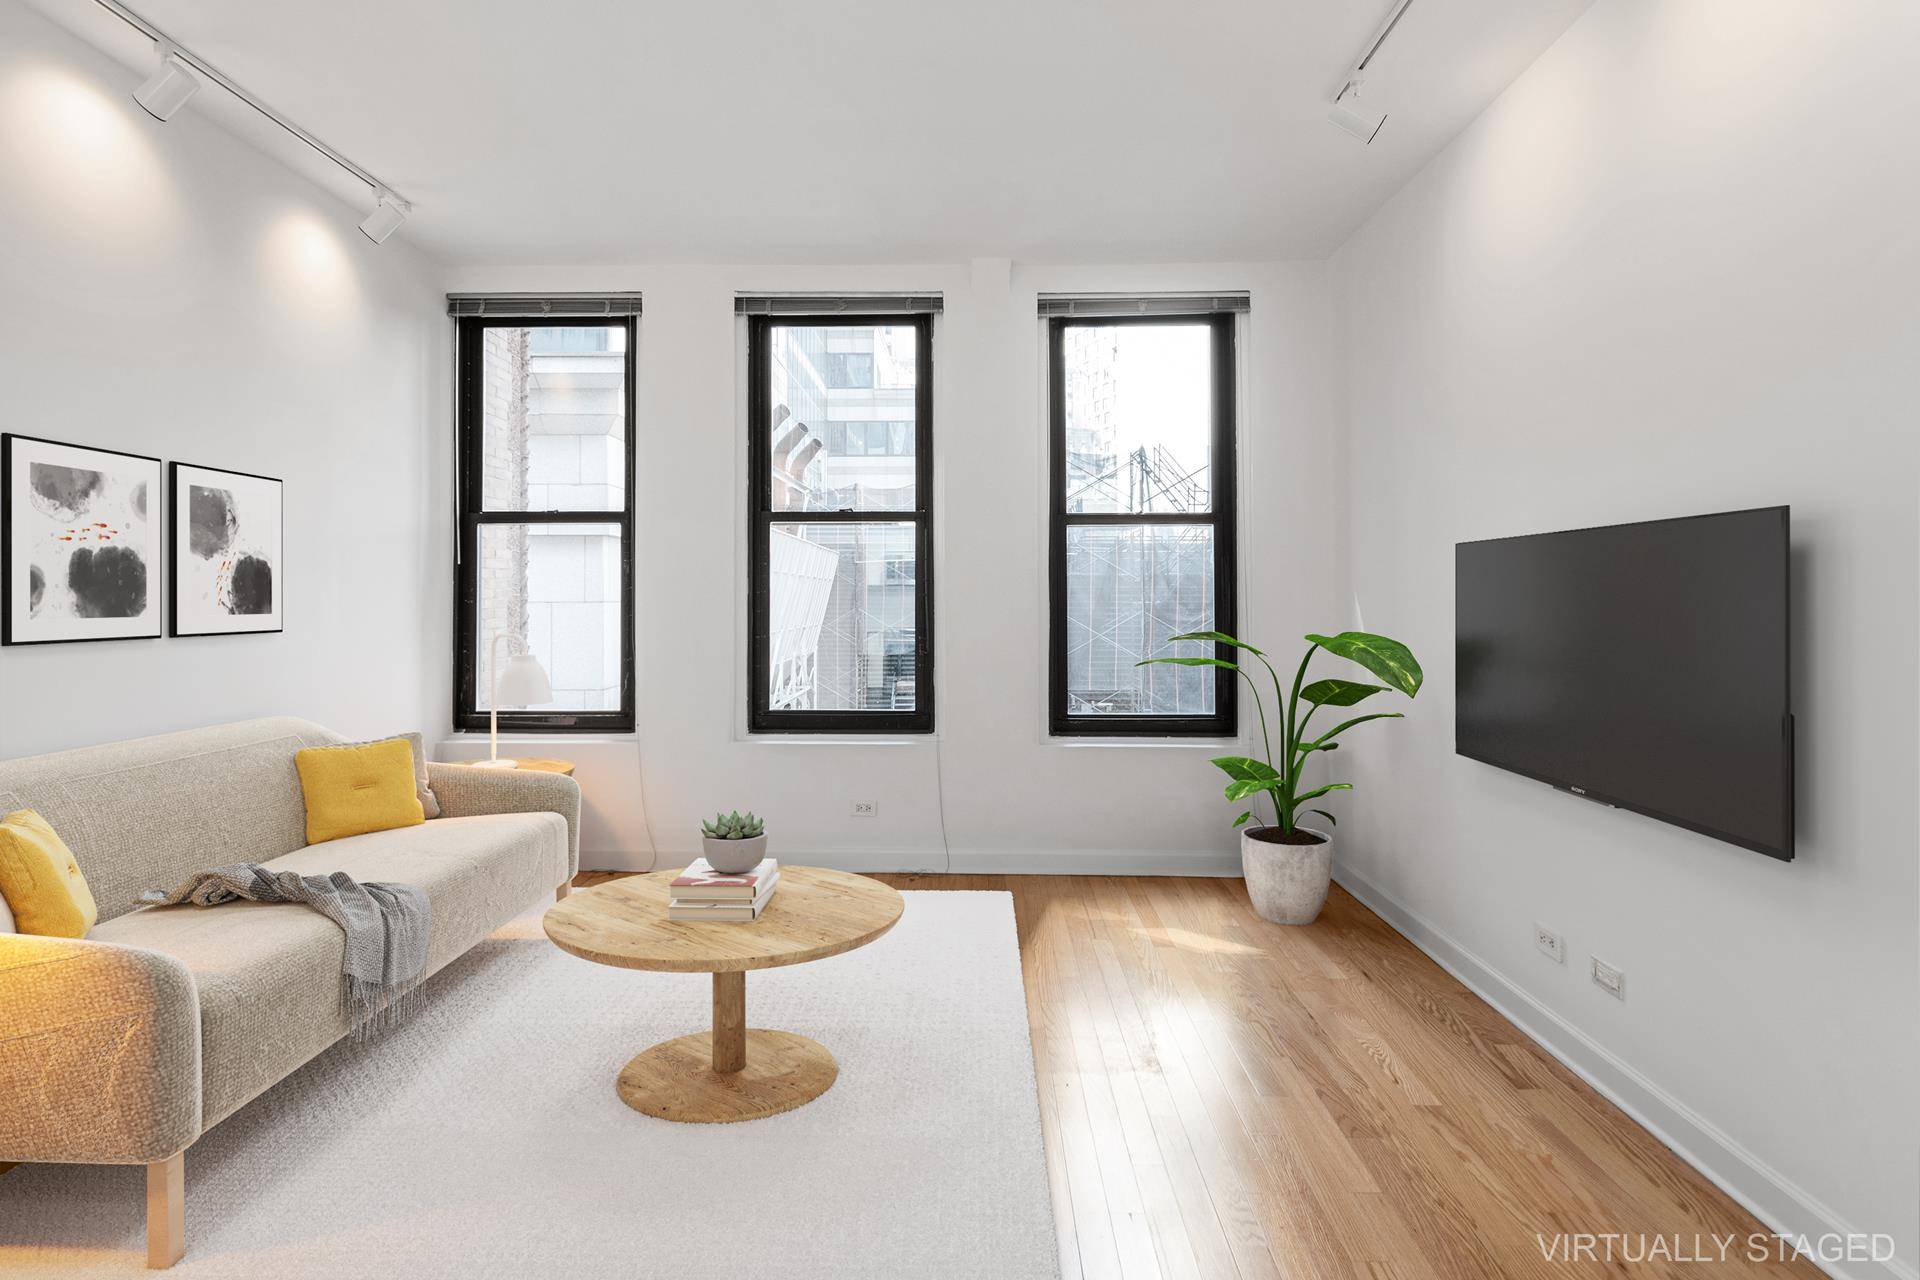 Residence 8B is a loft like one bedroom condominium with both South and Eastern exposures in landmarked 56 Pine Street.